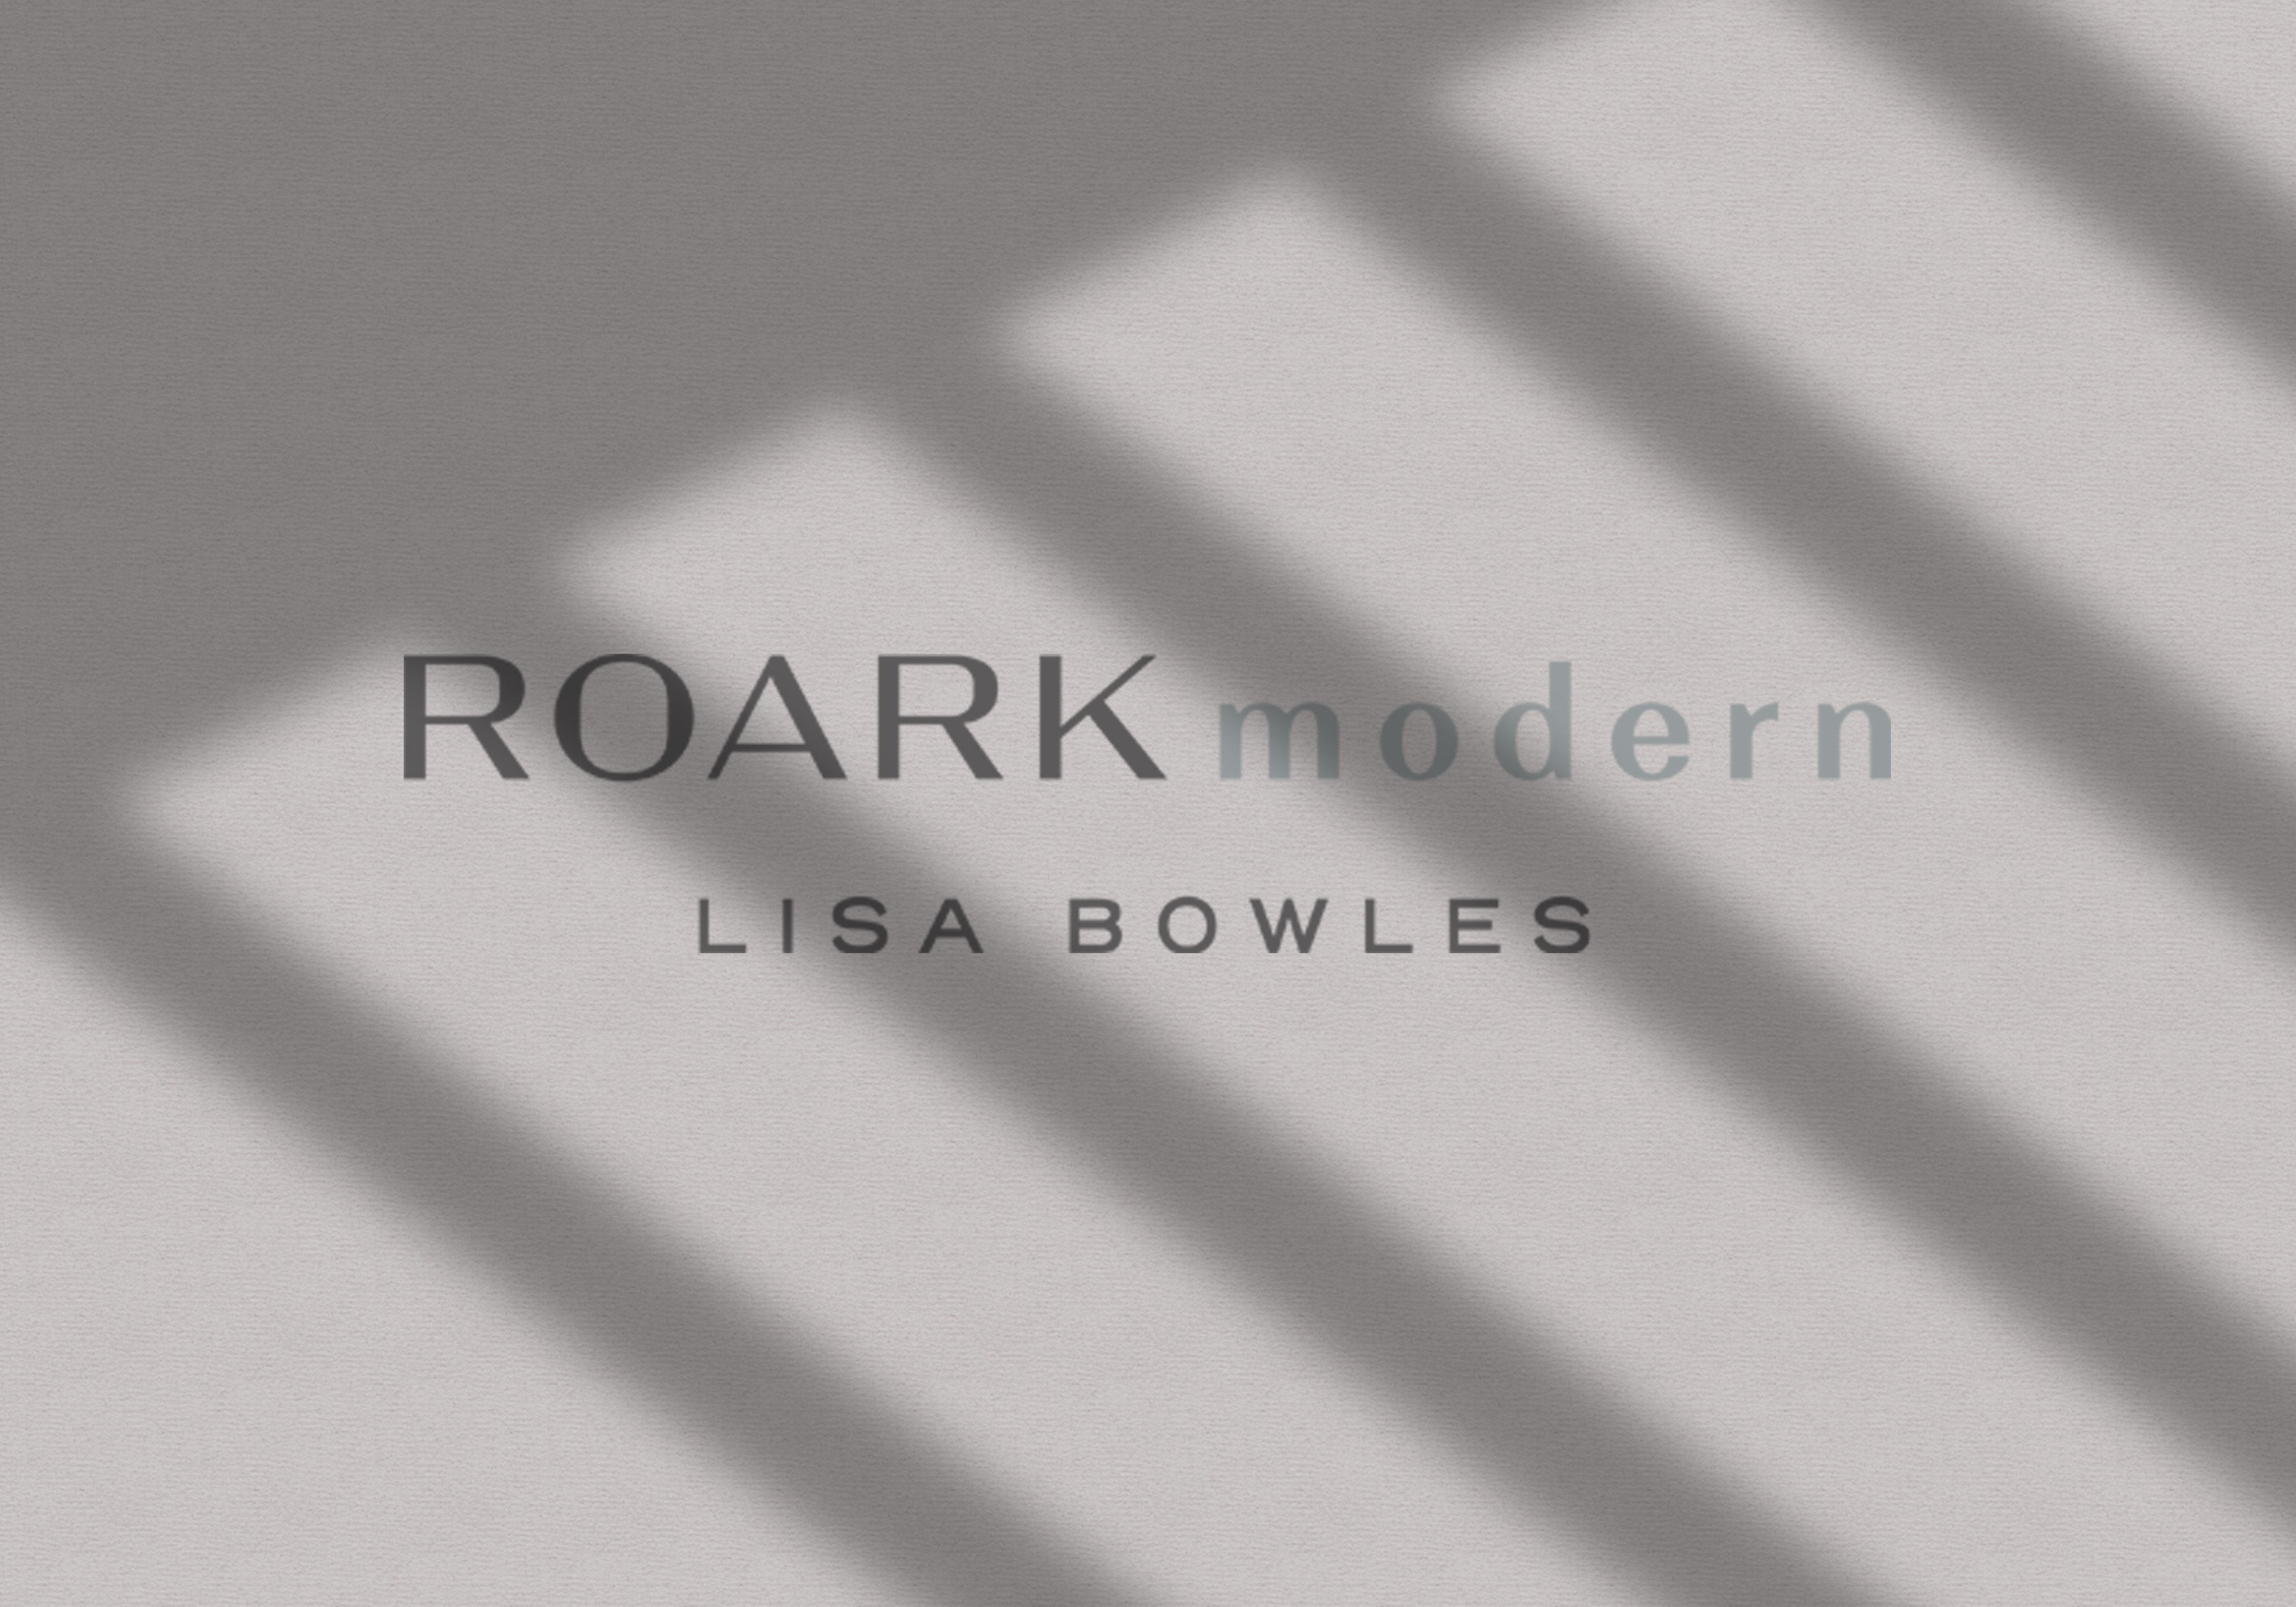 Roark Modern Branding and Shopify Ecommerce Web Design by Studio Seagraves Design Agency Chesterfield Missouri St Louis Woman Owned Female Founded